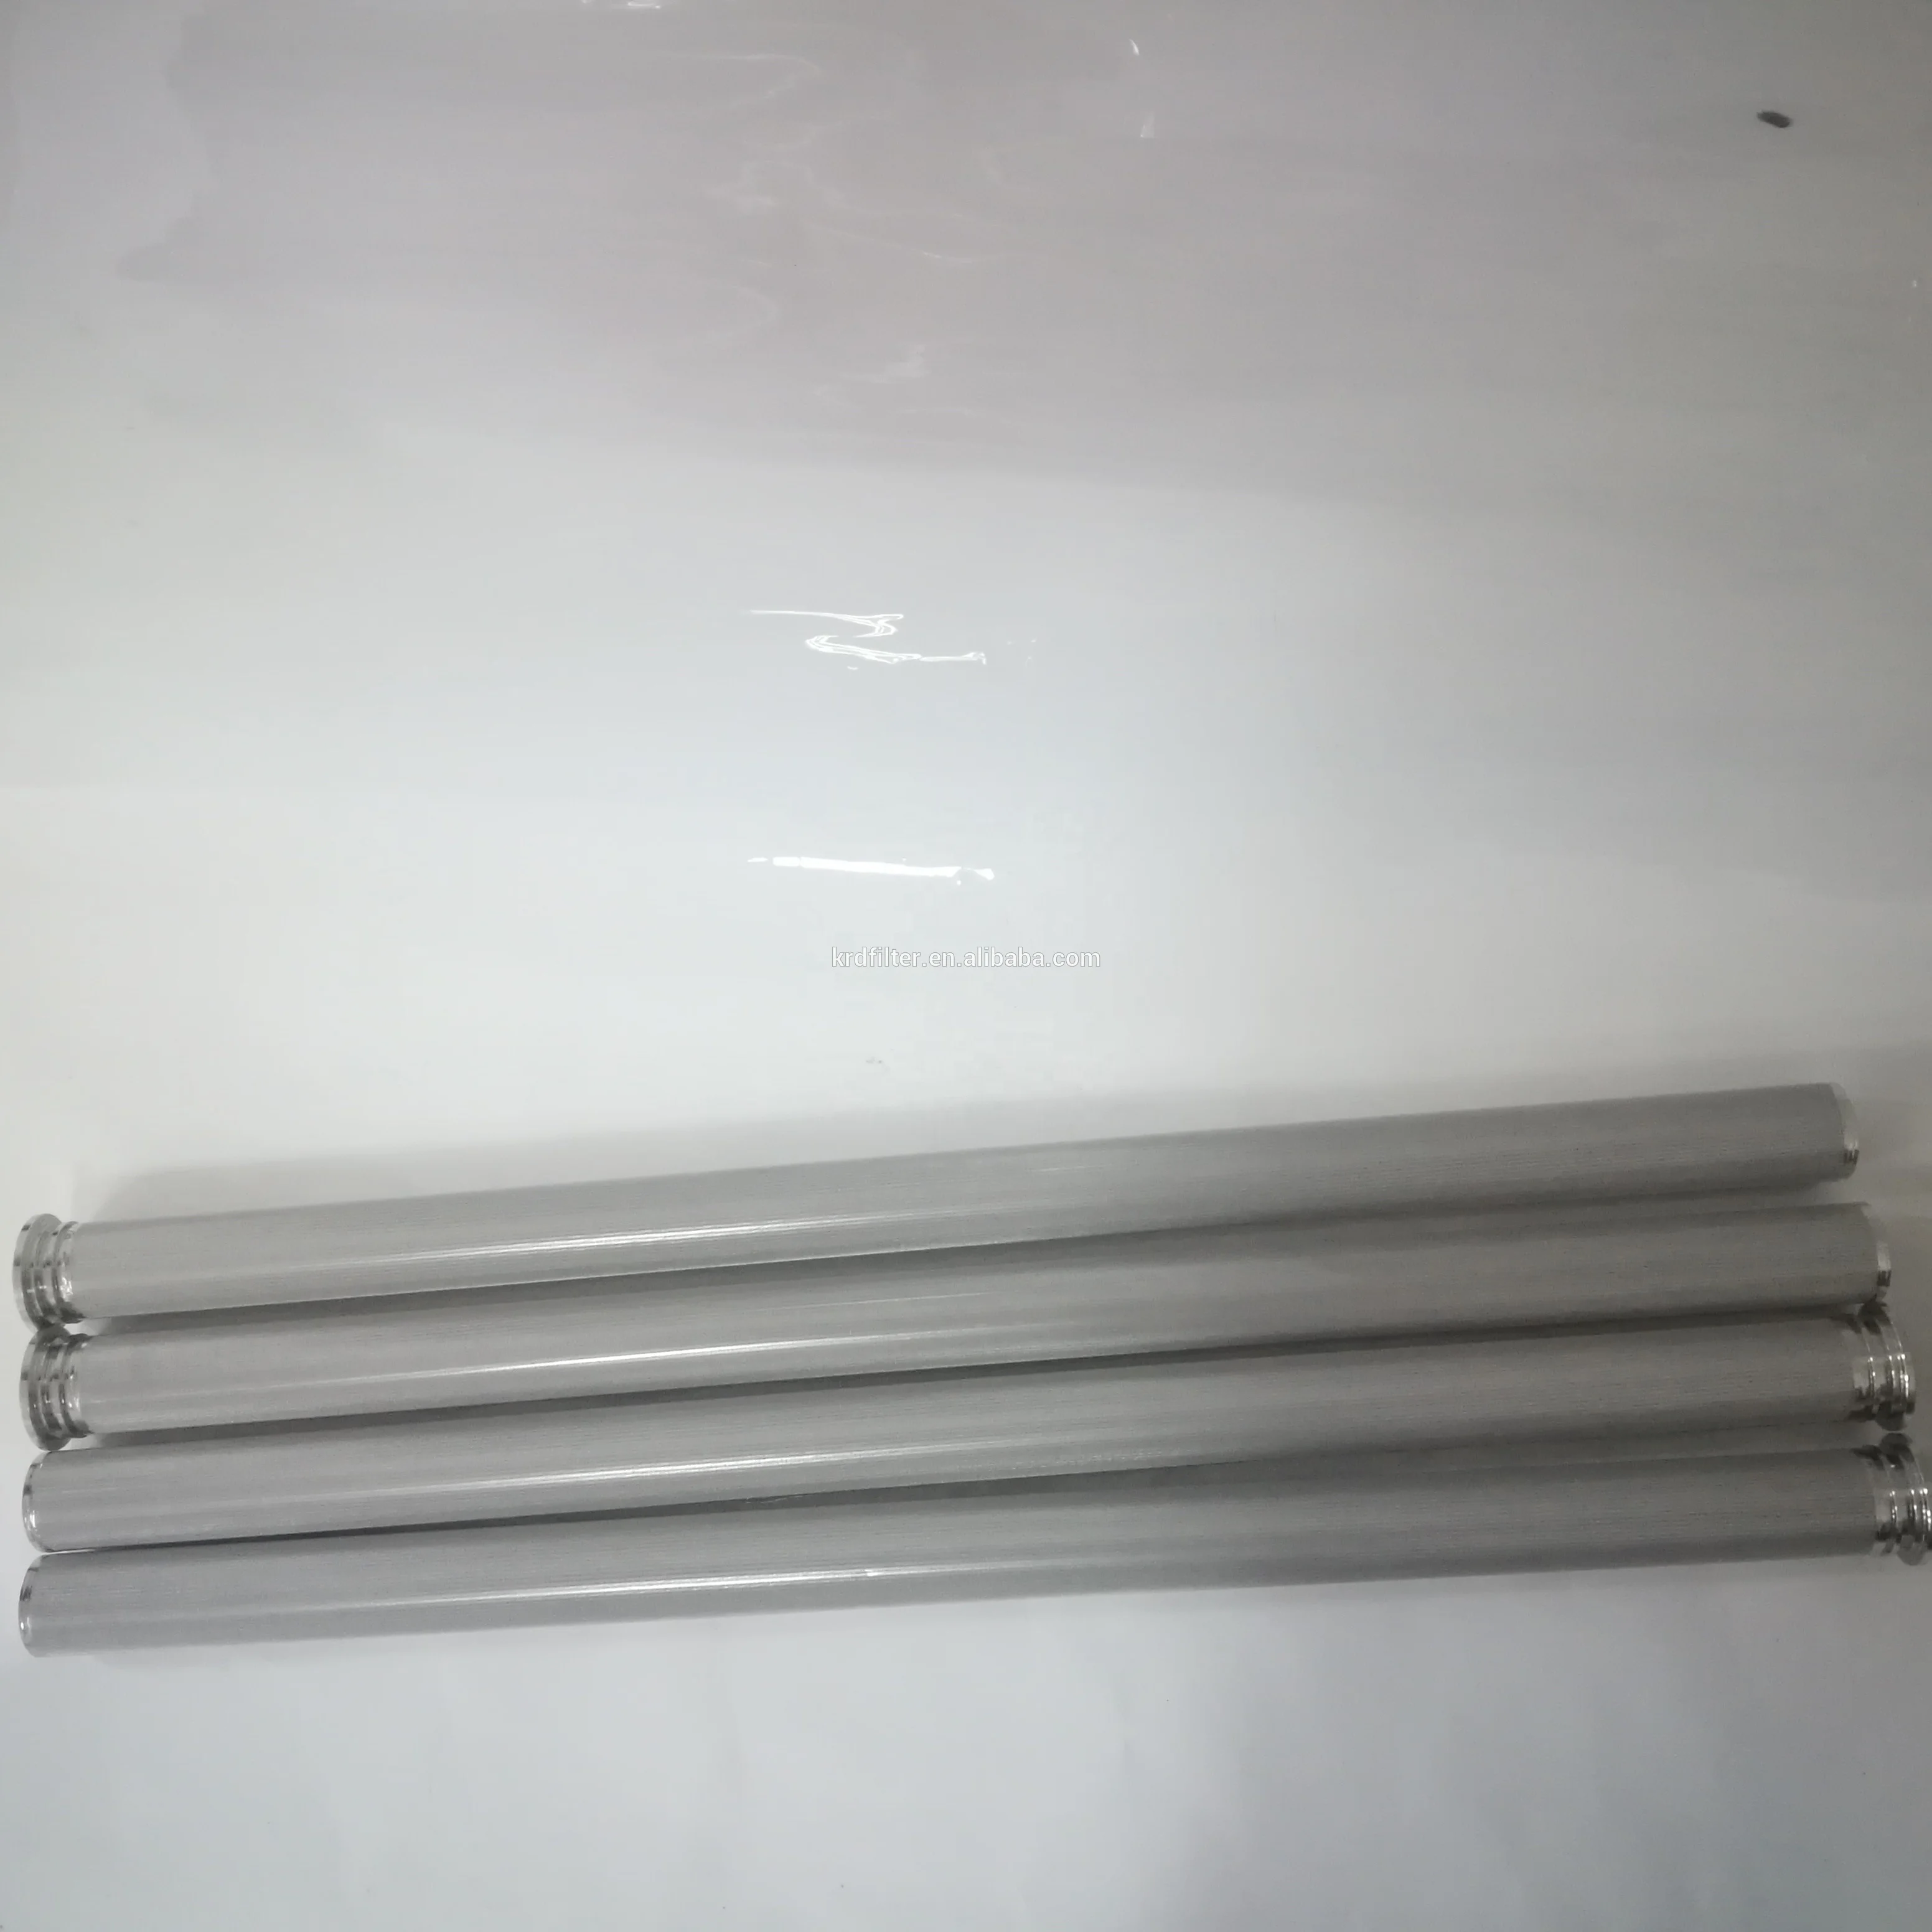 high quality sintered filter element are comprised of five layers mental of wire mesh